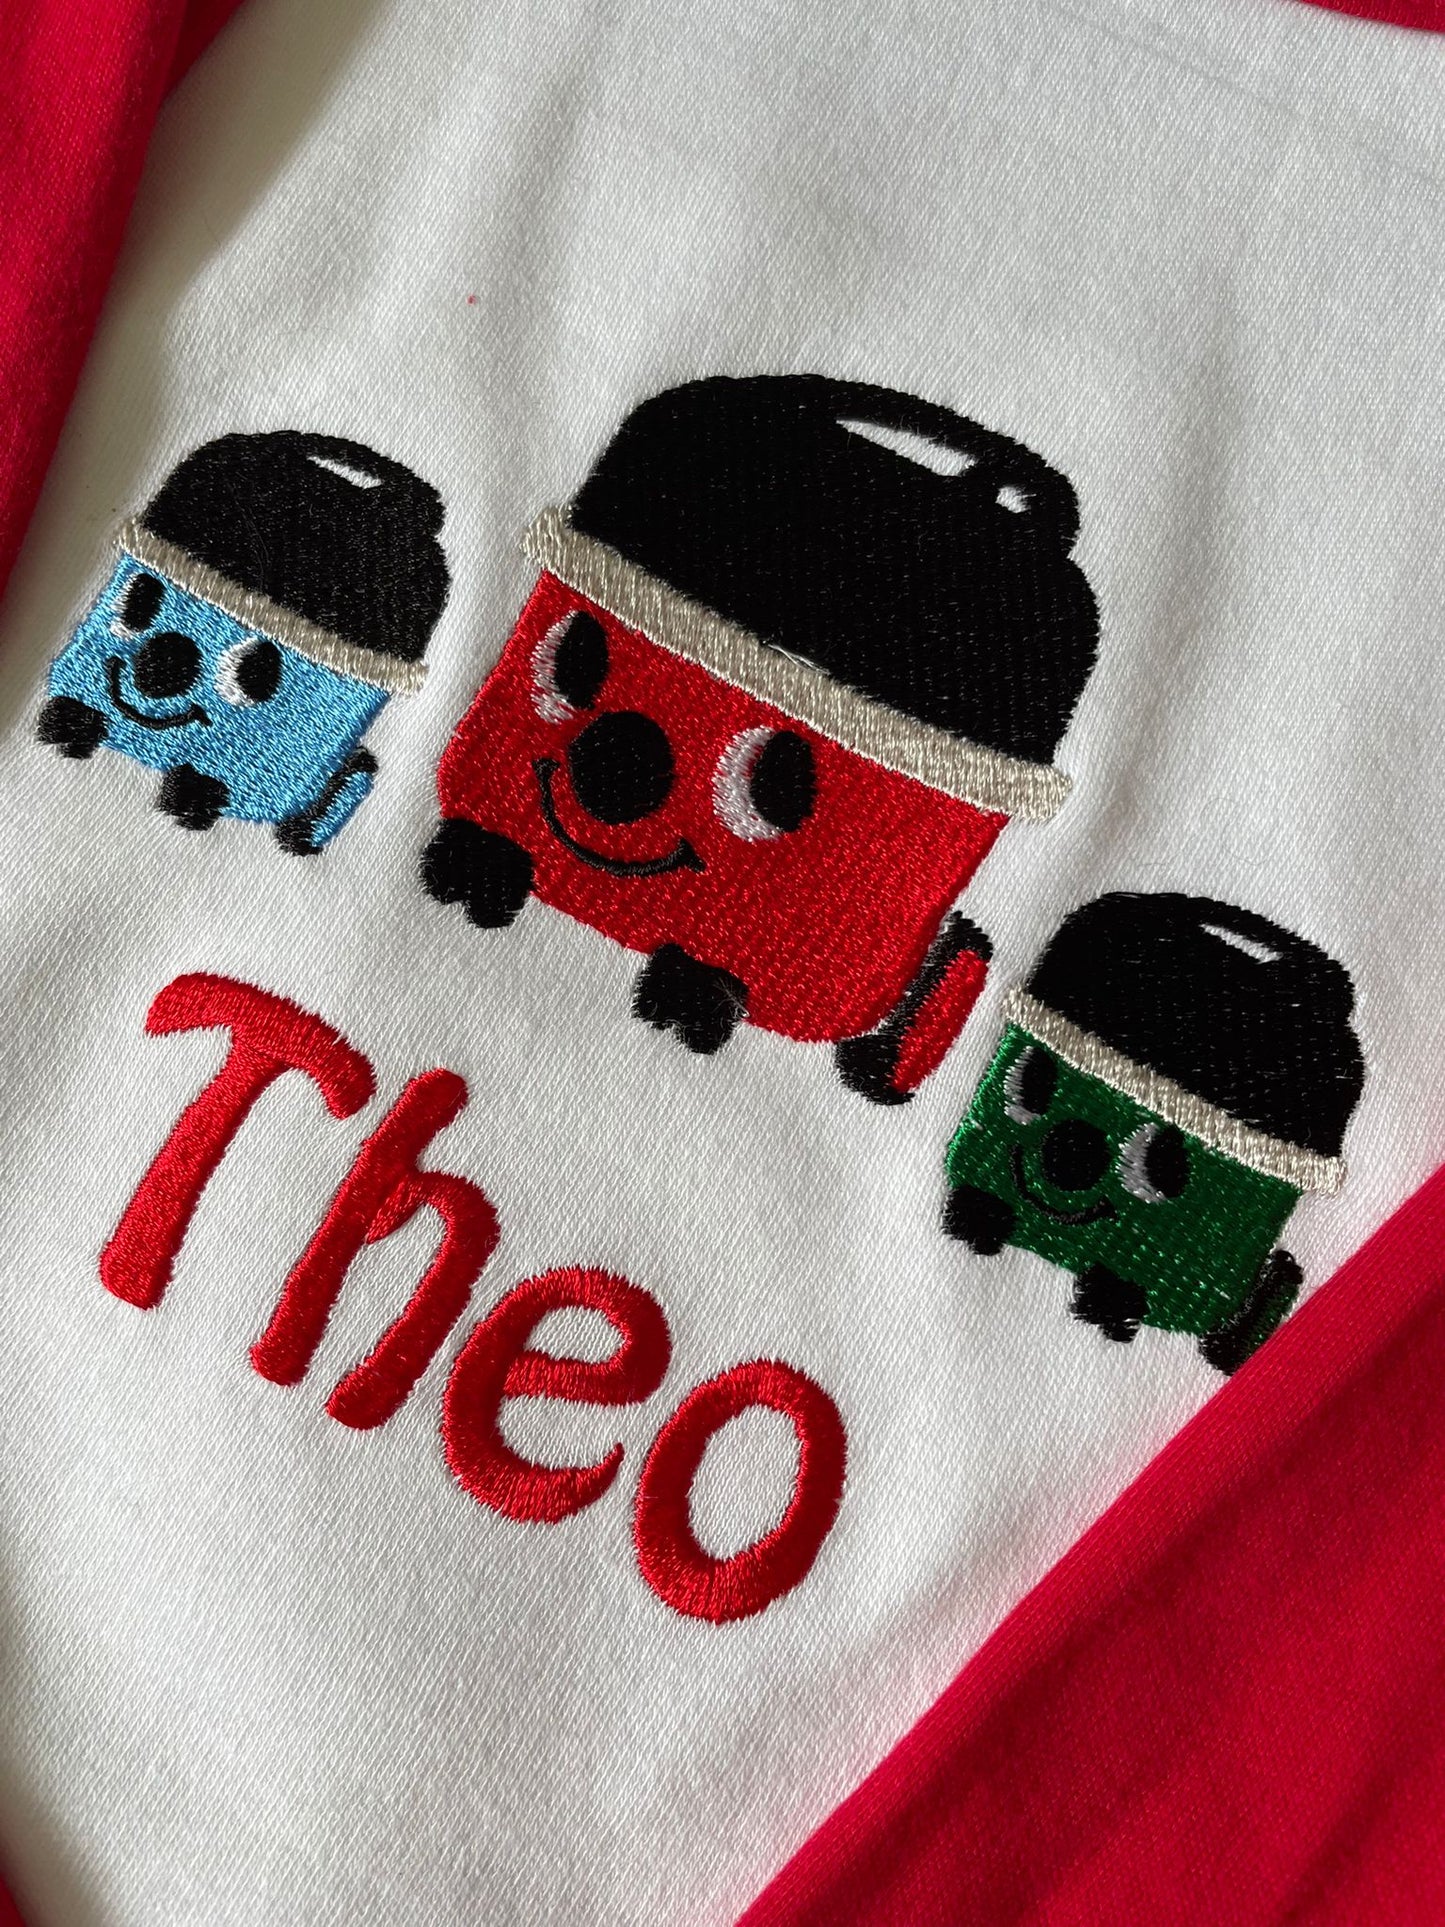 Personalised Pyjamas, embroidered with name & Henry hoover & friends design. Gift, keepsake, high quality, soft, PJ's